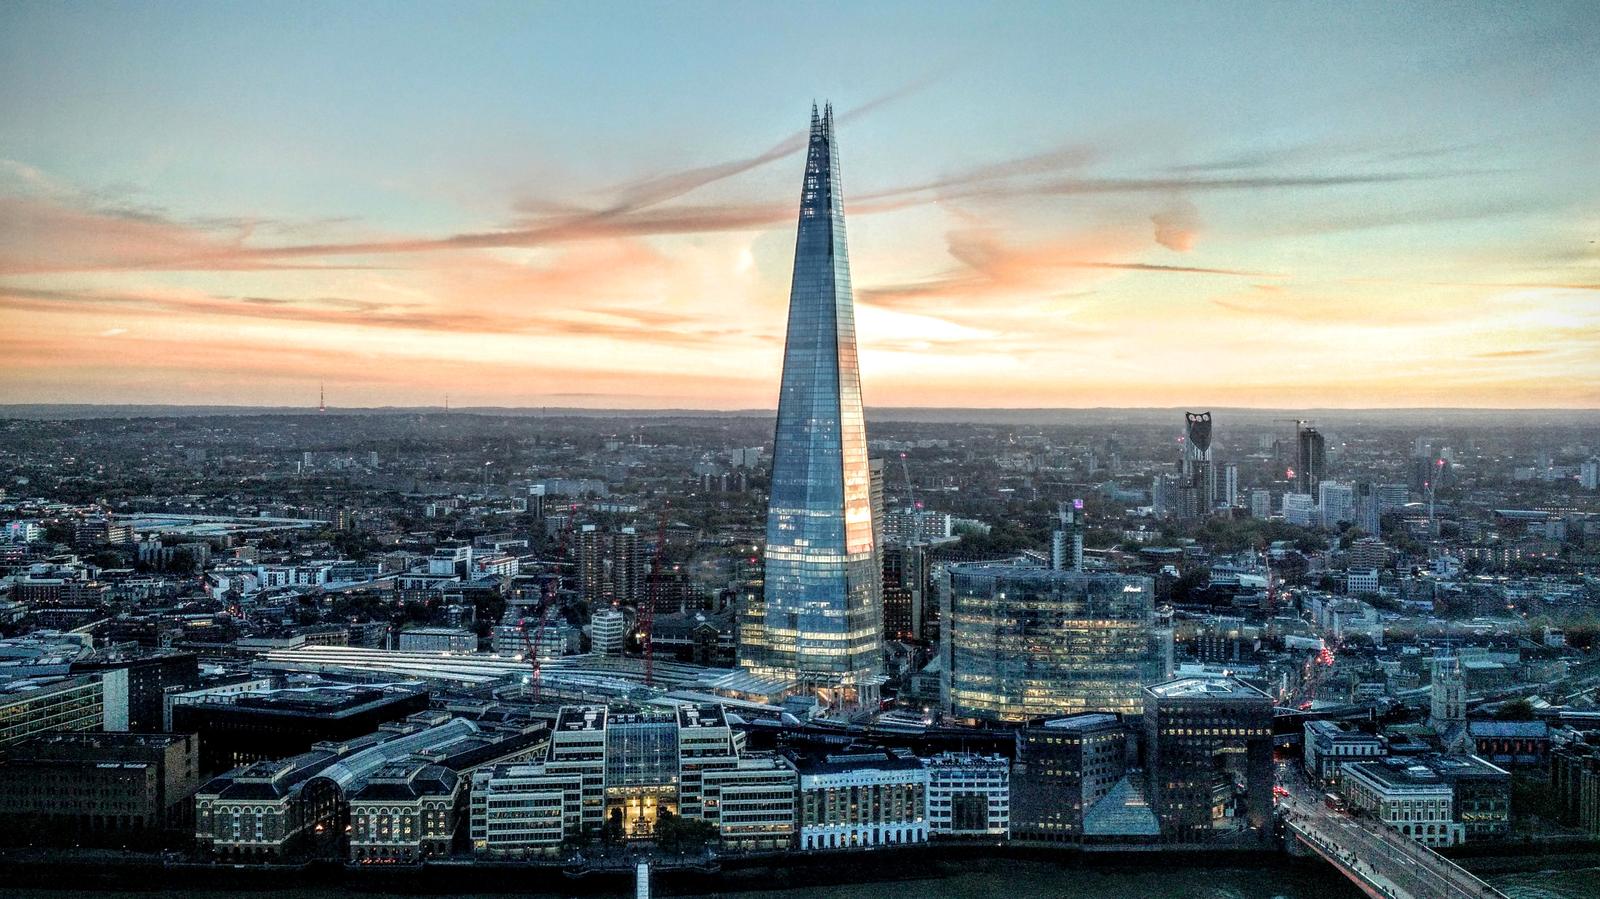 Plan a Trip to London If You Want to Know When You’ll Meet Your Soulmate ❤️ The Shard, London